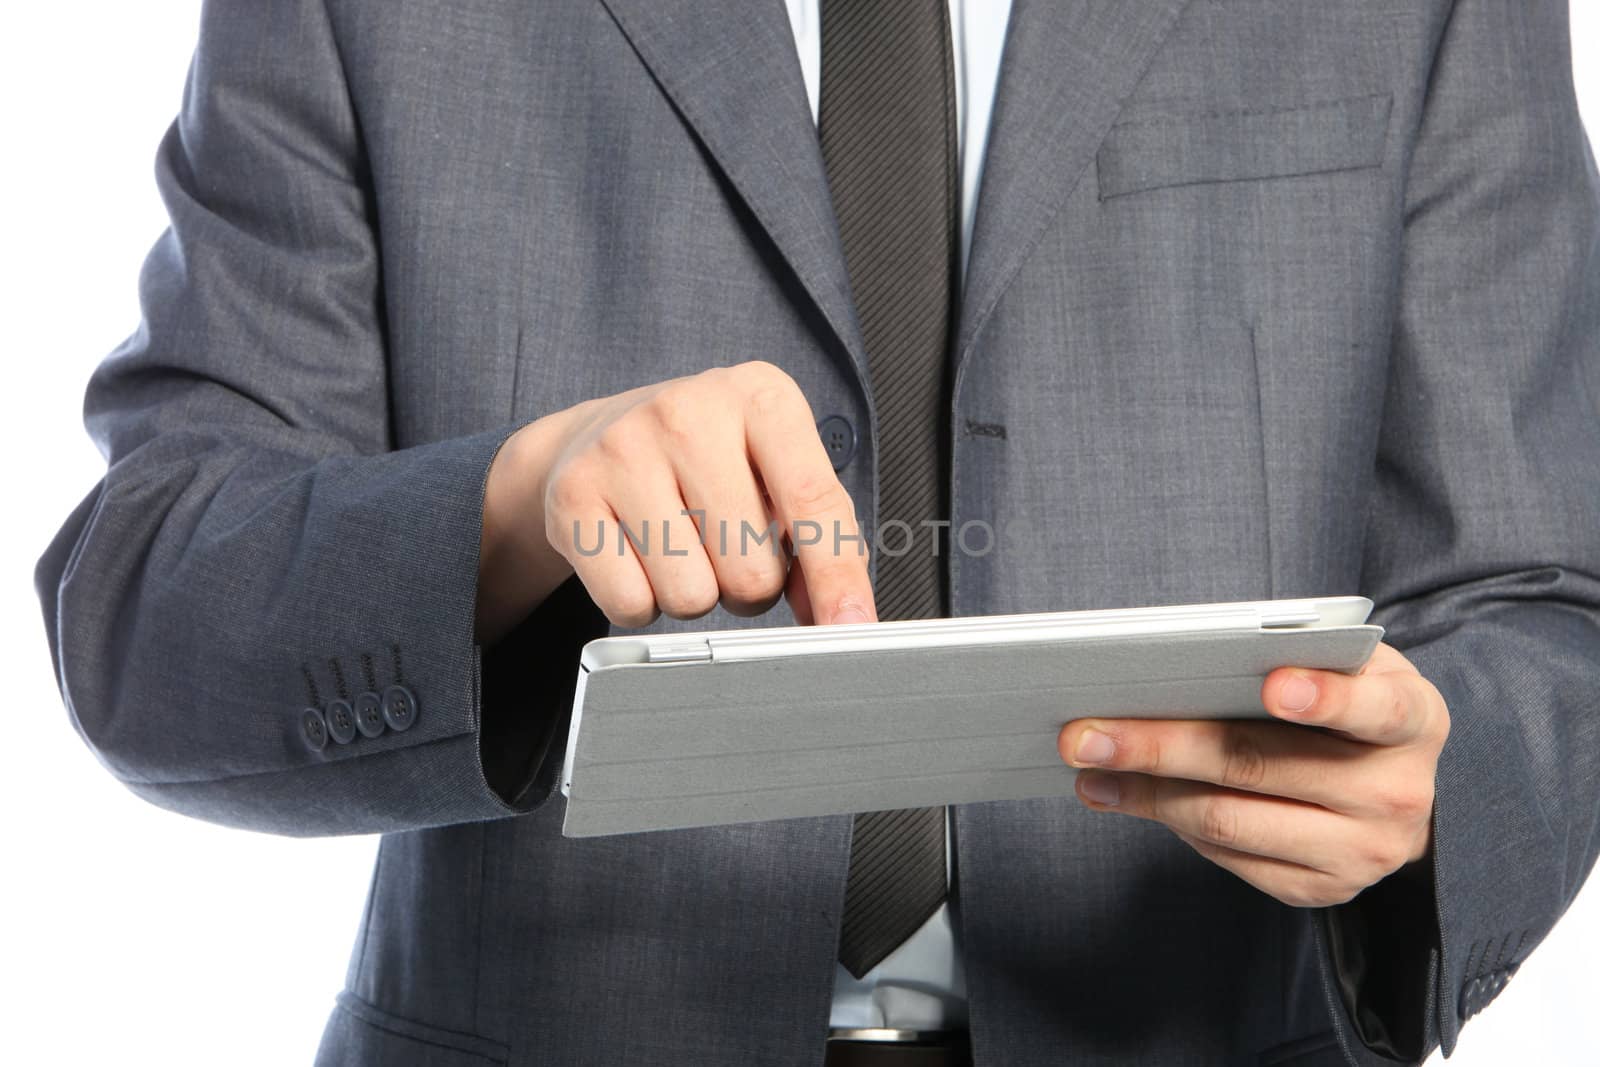 Torso of a businessman wearing business suit and using a PC tablet, close up